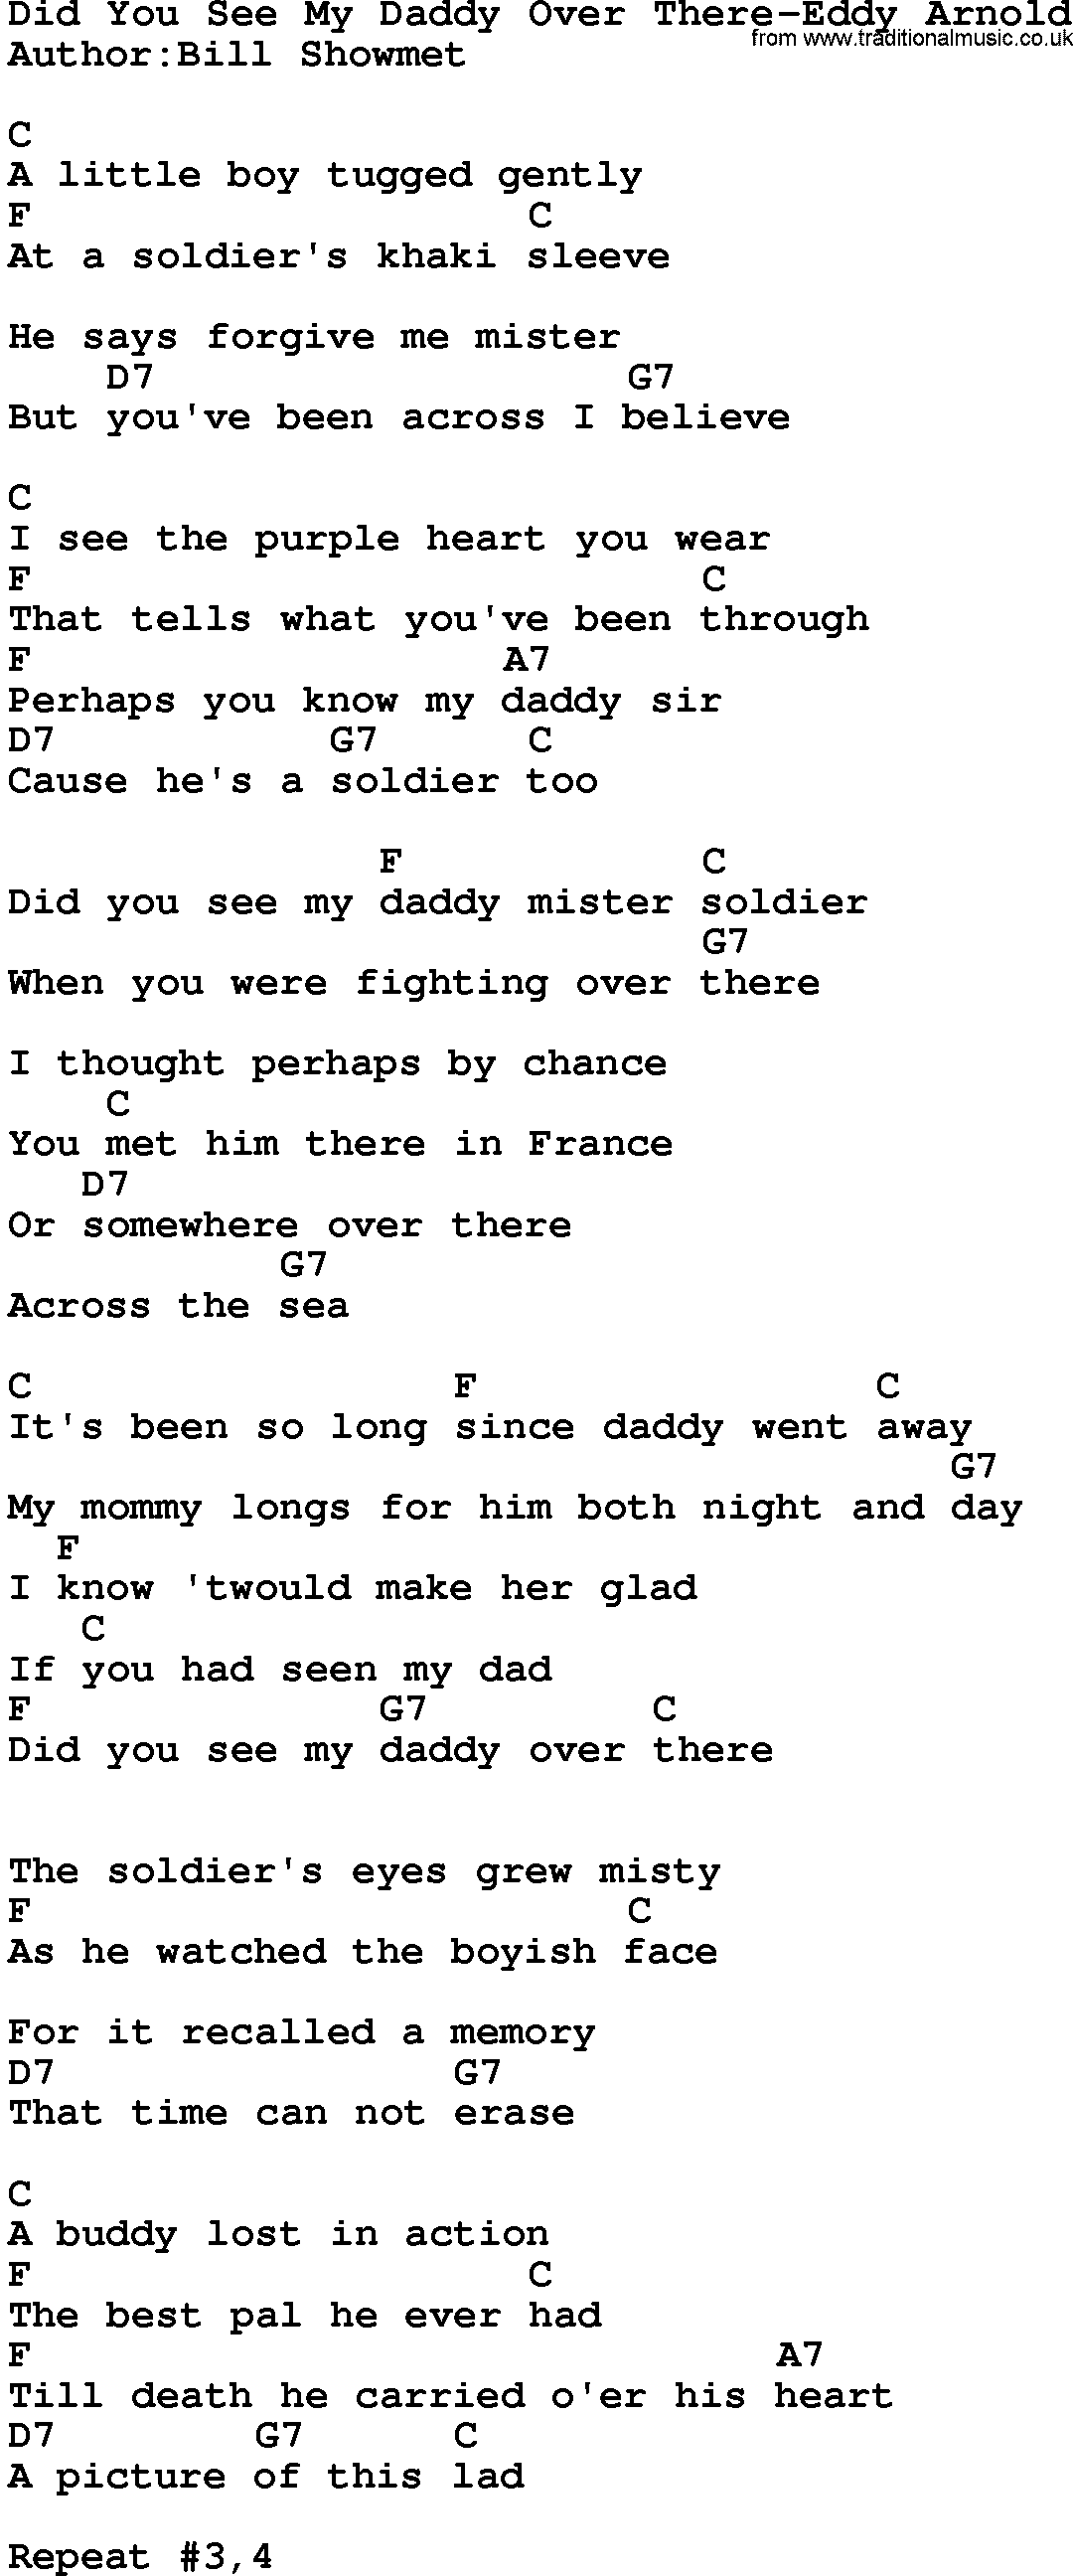 Country music song: Did You See My Daddy Over There-Eddy Arnold lyrics and chords